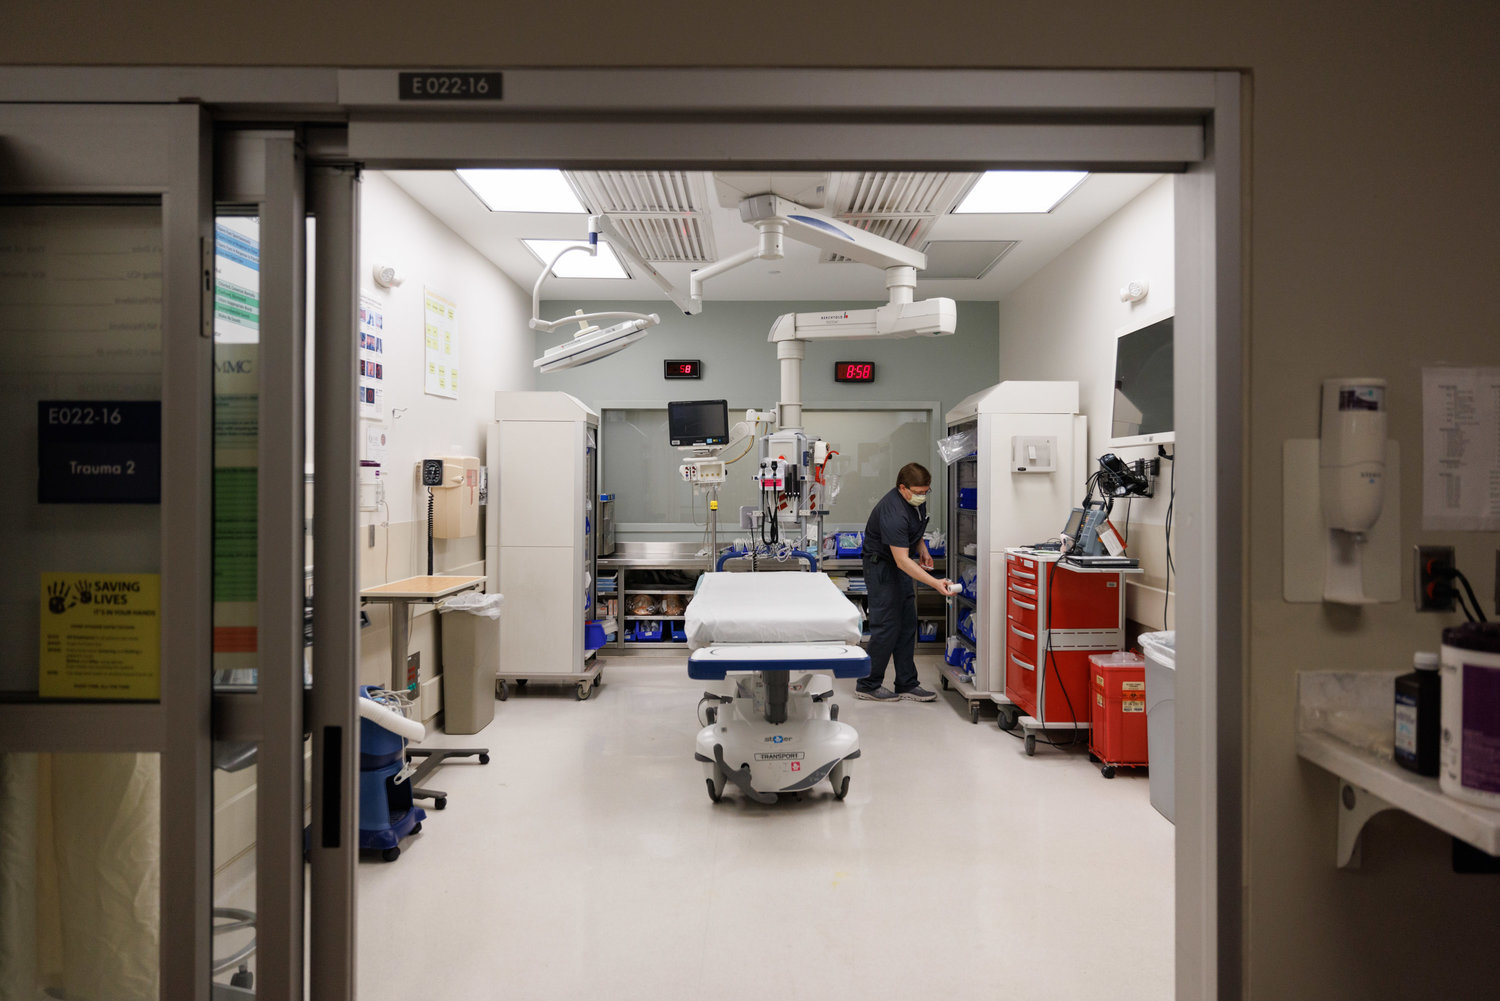 Registered Nurse Adrian Davis tidies up a Trauma Room in the Adult Emergency Department at the University of Mississippi Medical Center.